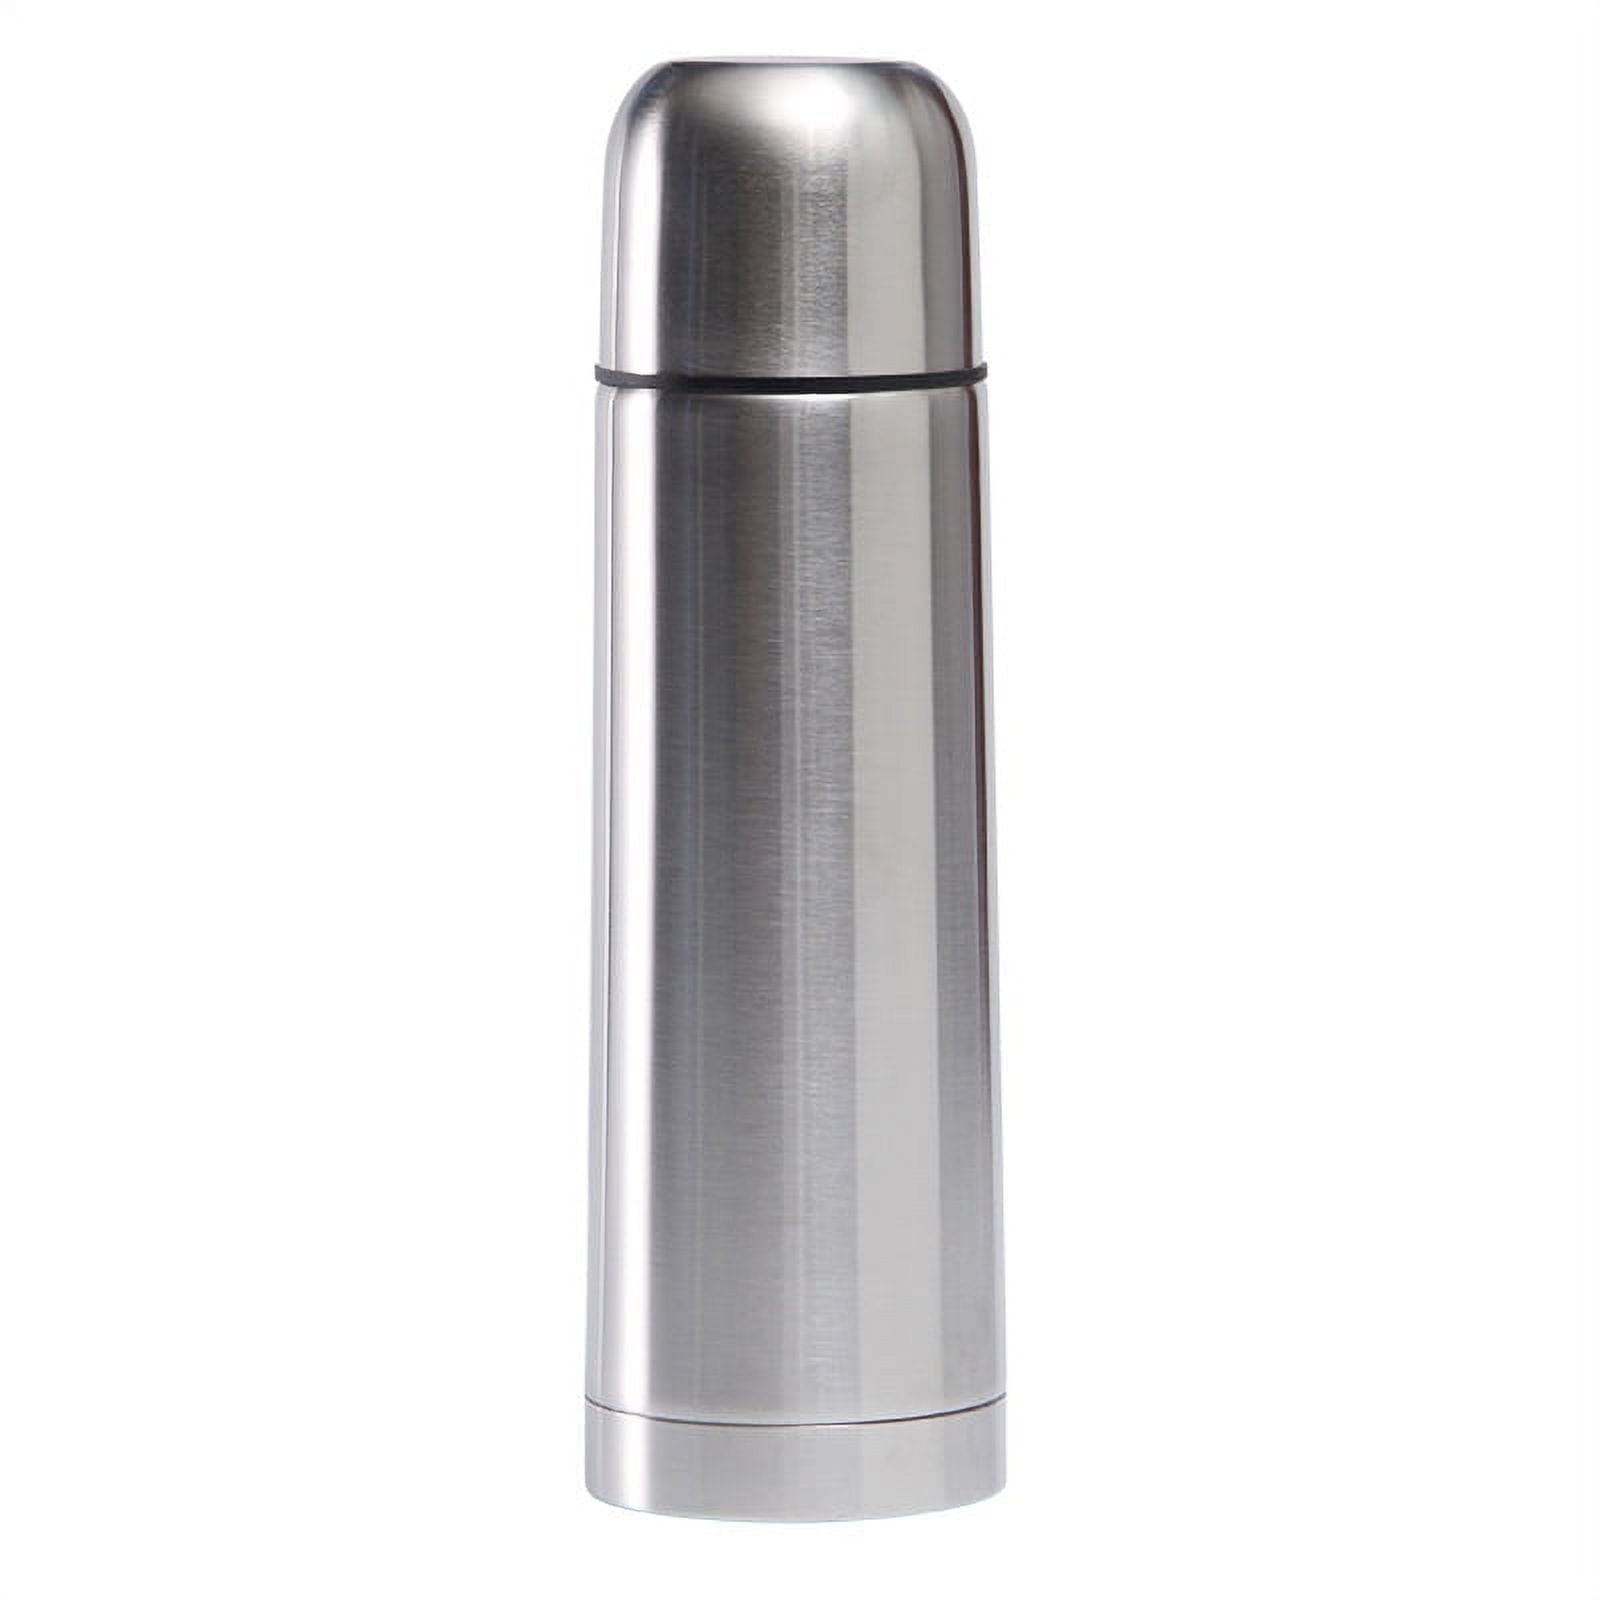  Stainless Steel Coffee Thermos 17oz, Hot Water & Cold Drinks  for Hours - Thermocafe Cooler, Vacuum Flask, Vacuum Thermos: Home & Kitchen